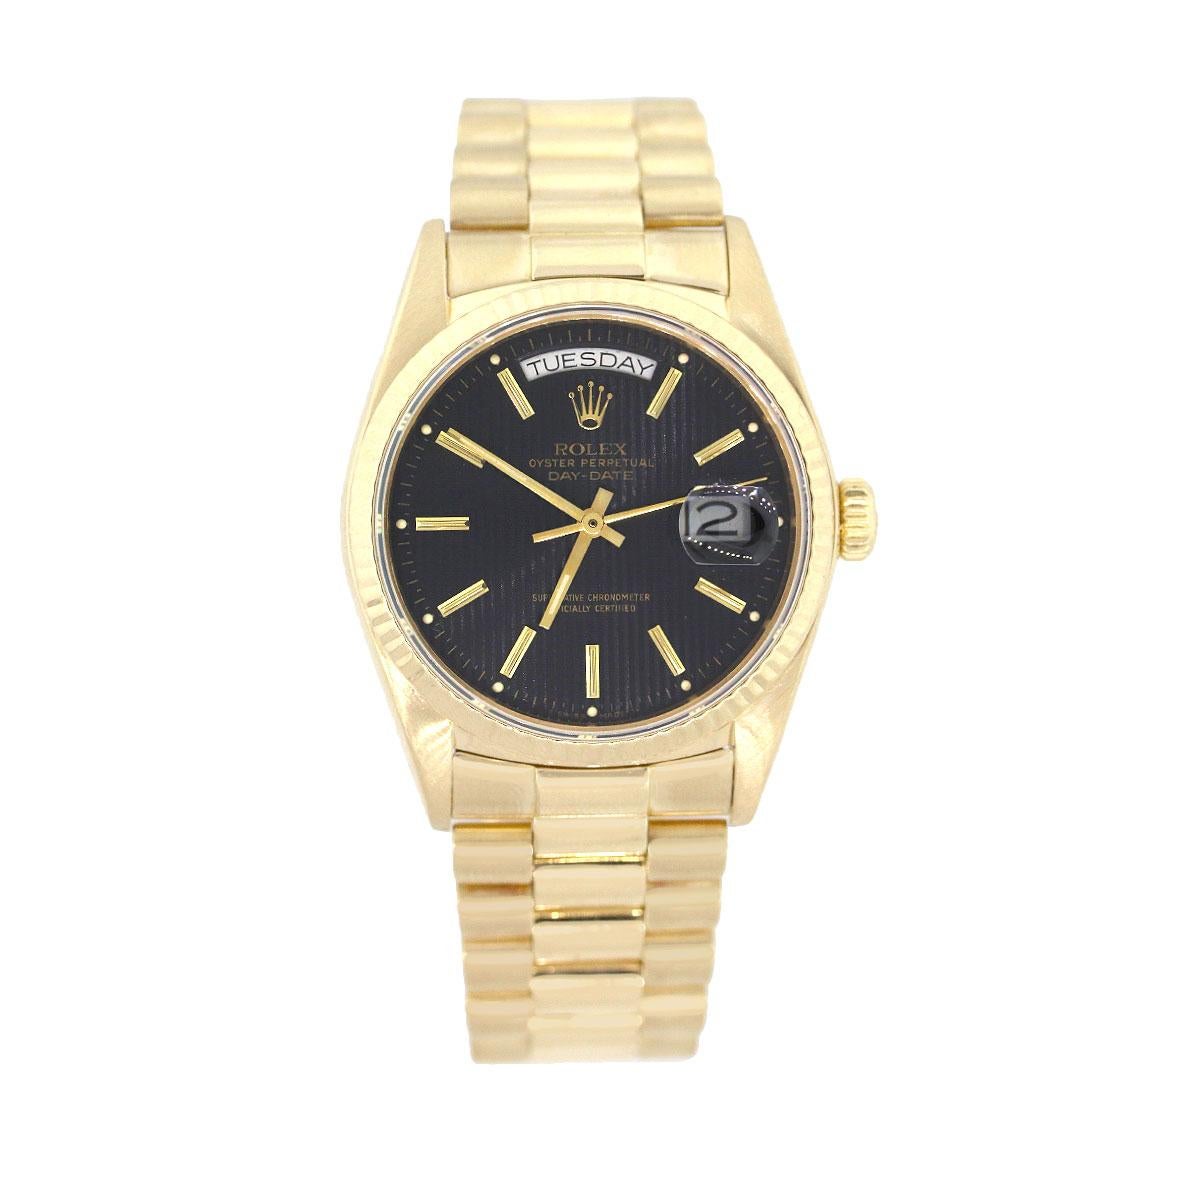 Brand: Rolex
MPN: 18038
Model: Day Date
Case Material: 18k yellow gold
Case Diameter: 36mm
Crystal: Plastic 
Bezel: 18k Yellow Gold fluted bezel
Dial: Black Tapestry textured dial with golden hands and hour markers. Date can be found at 3 o’Clock